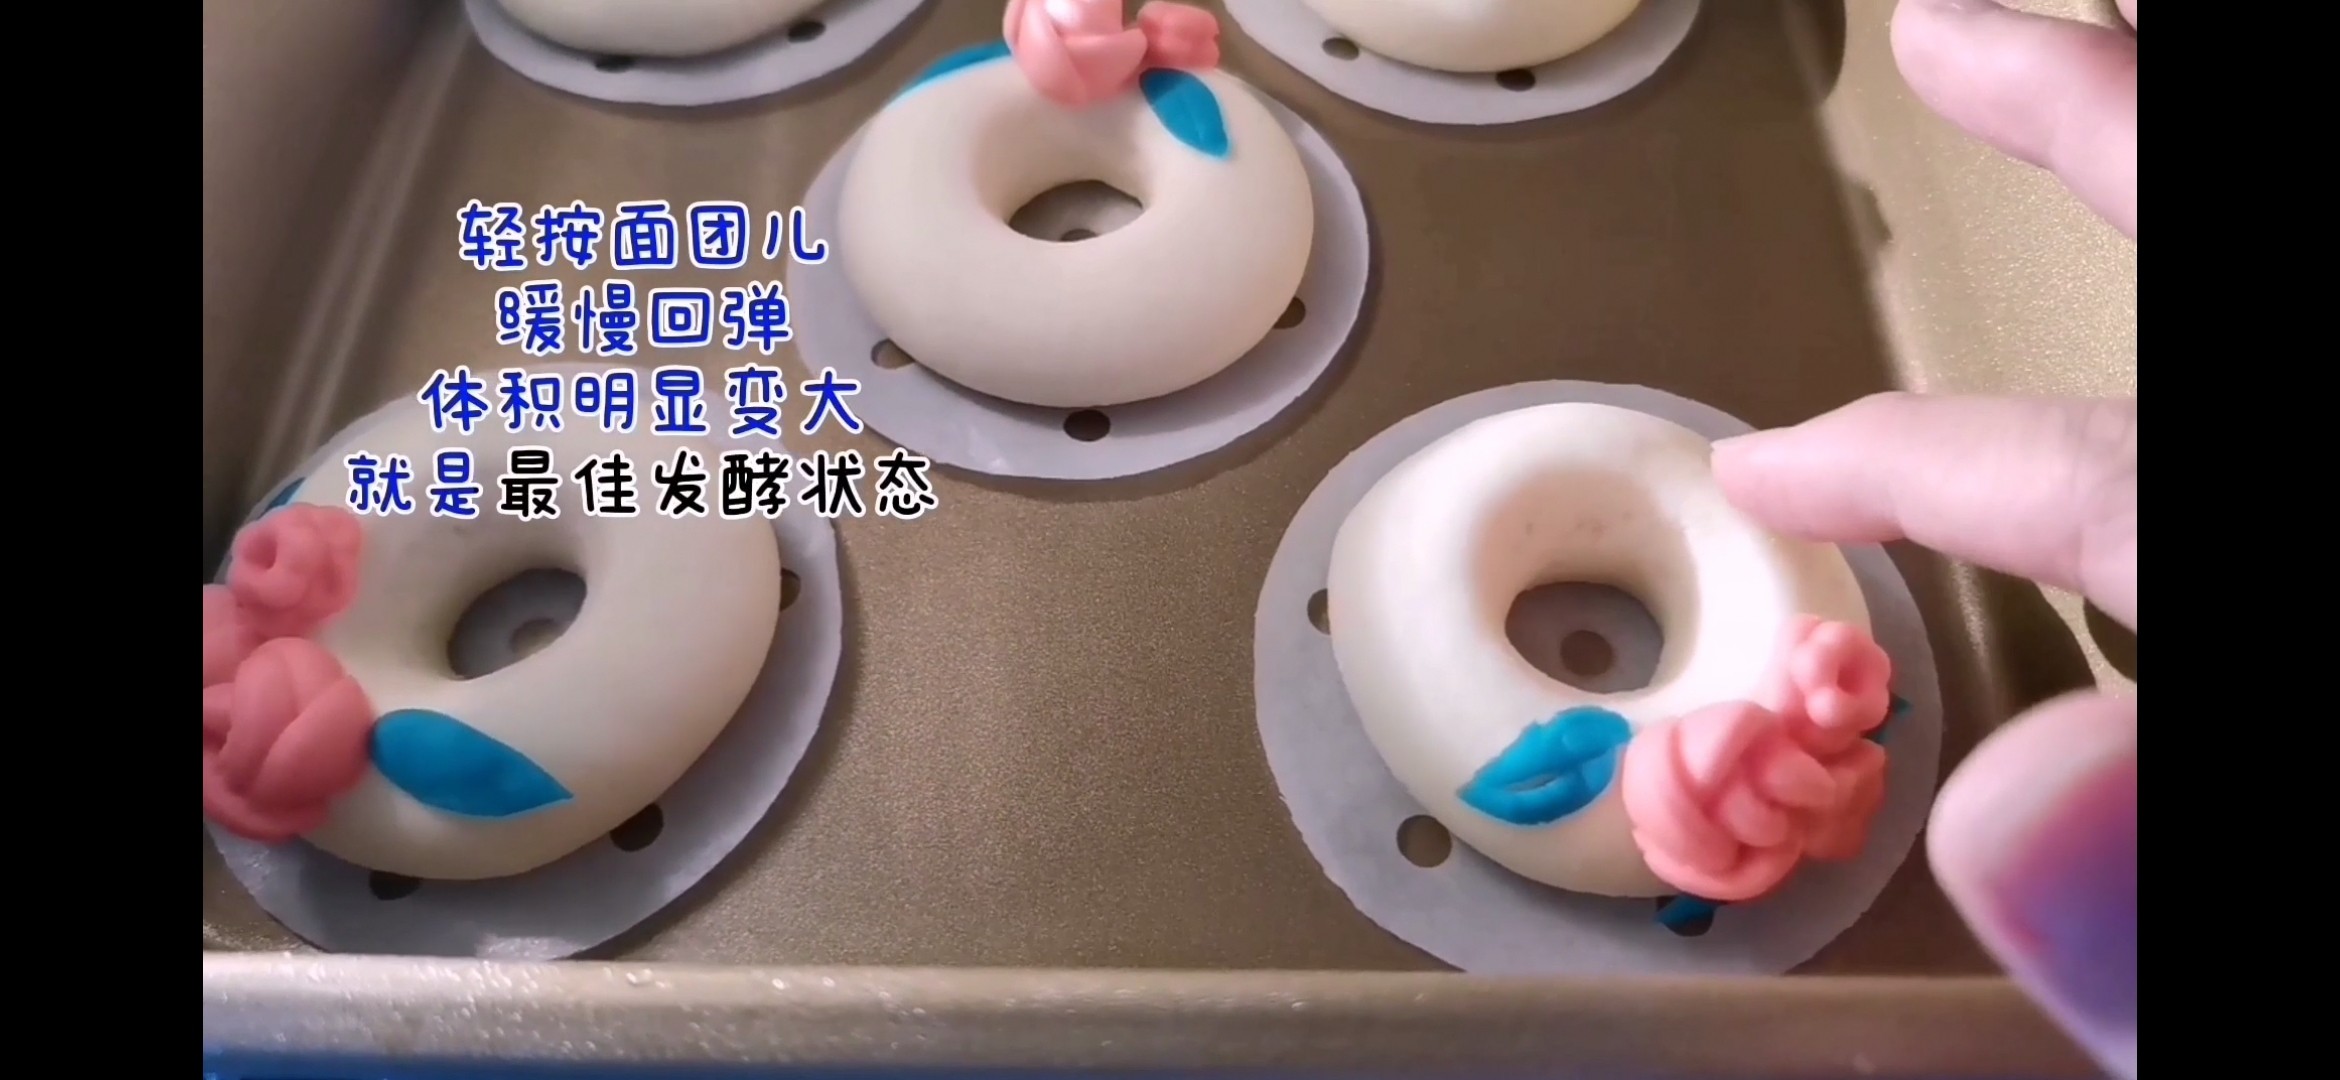 Non-fried and More Nutritious and Delicious ~ Flower Donuts. Steamed Bread recipe